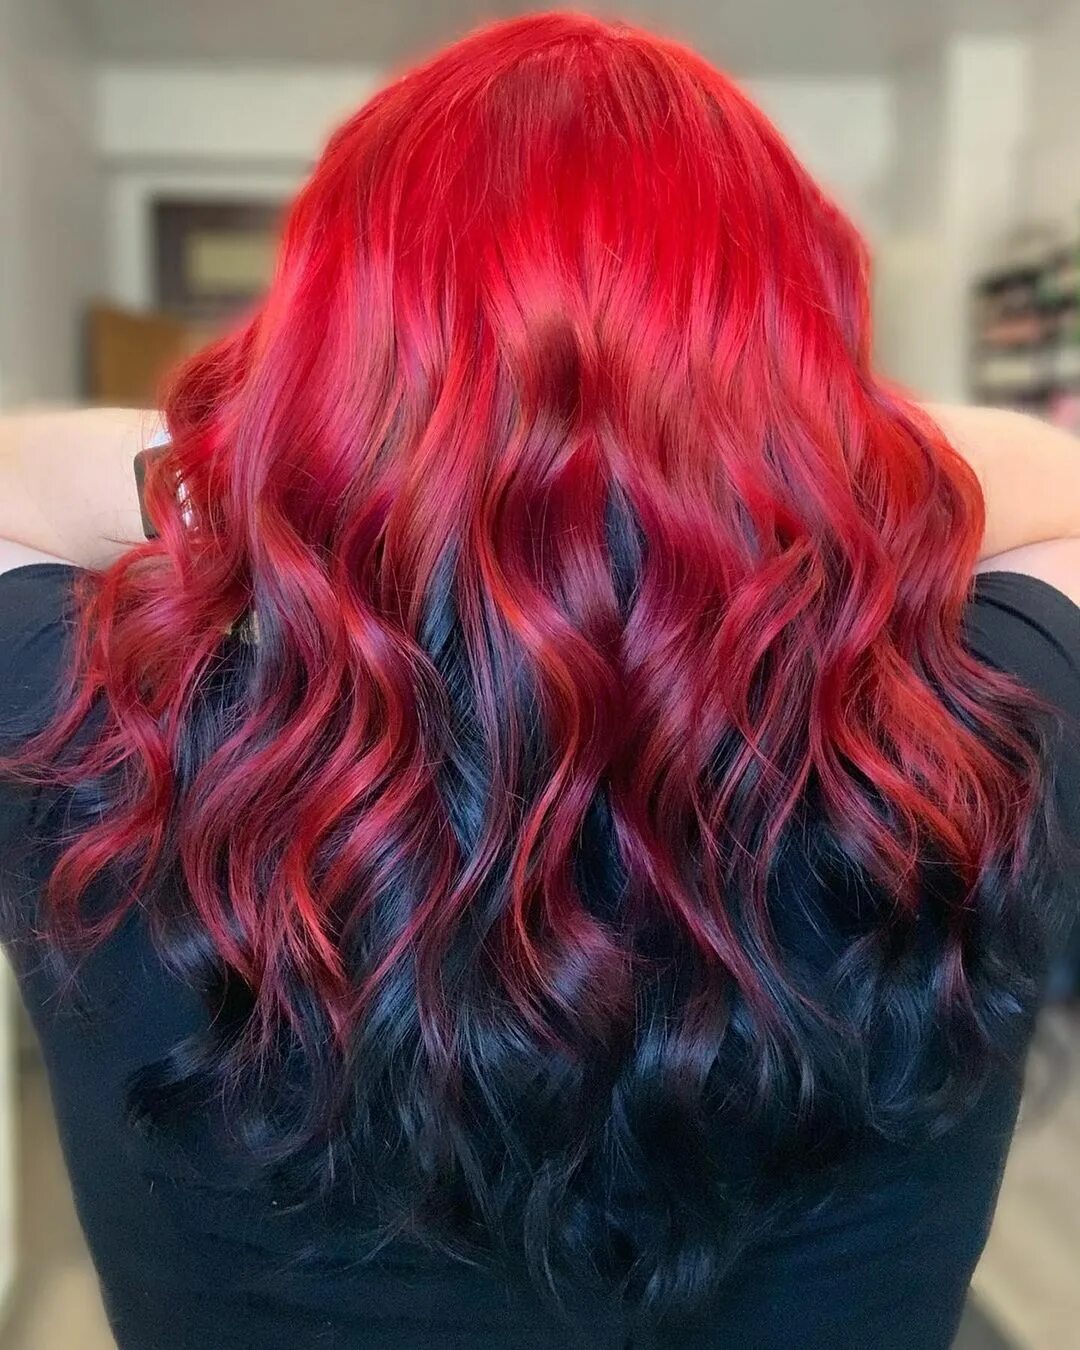 Section one is PRAVANA VIVIDS Red melted into... 